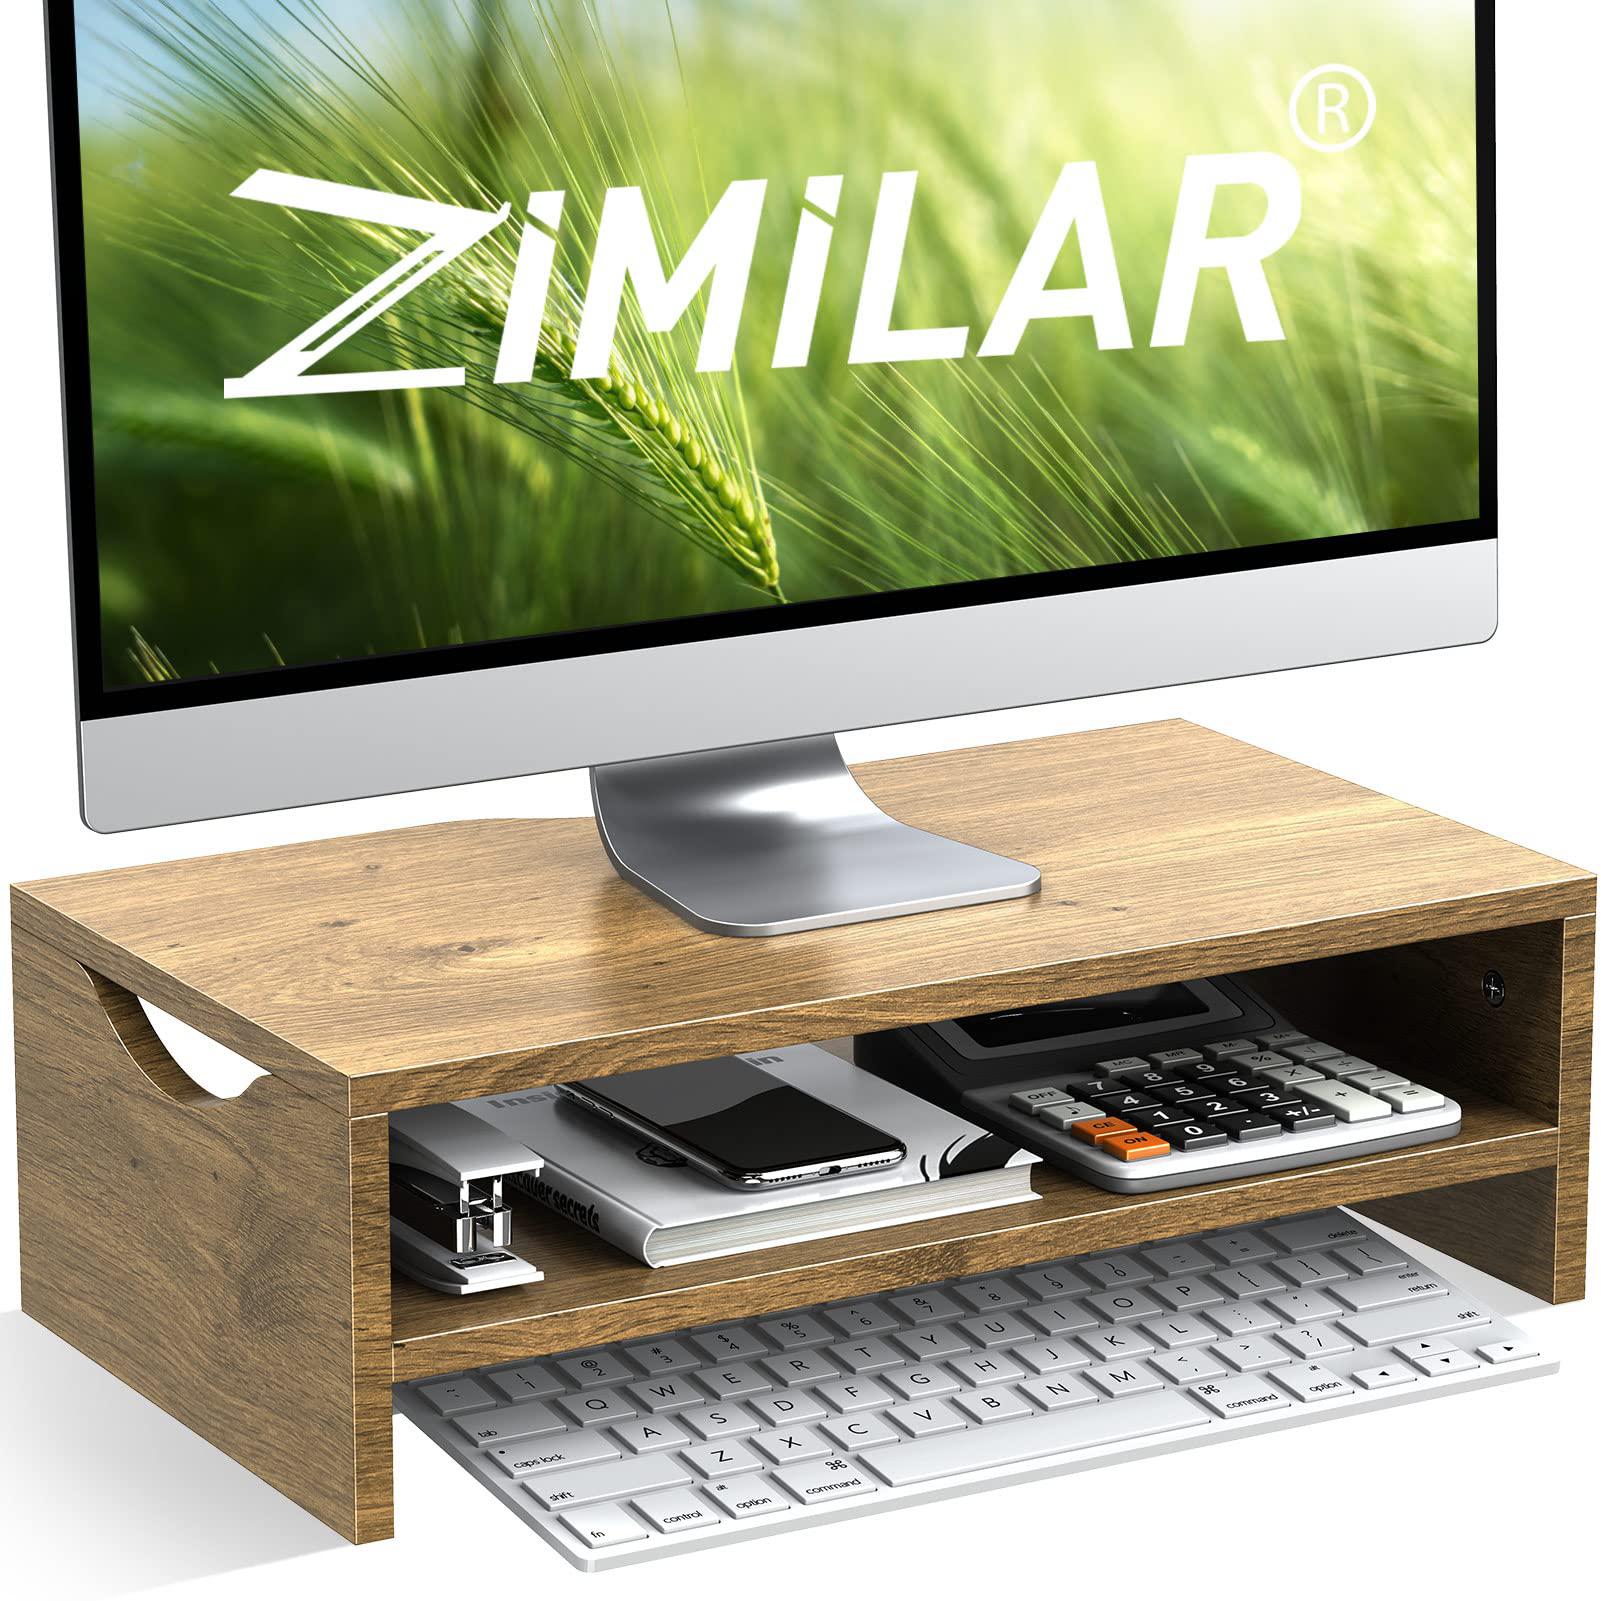 zimilar monitor stand riser, 2 tiers laptop computer monitor riser for pc screen, imac, desktop wooden screen monitor stand r